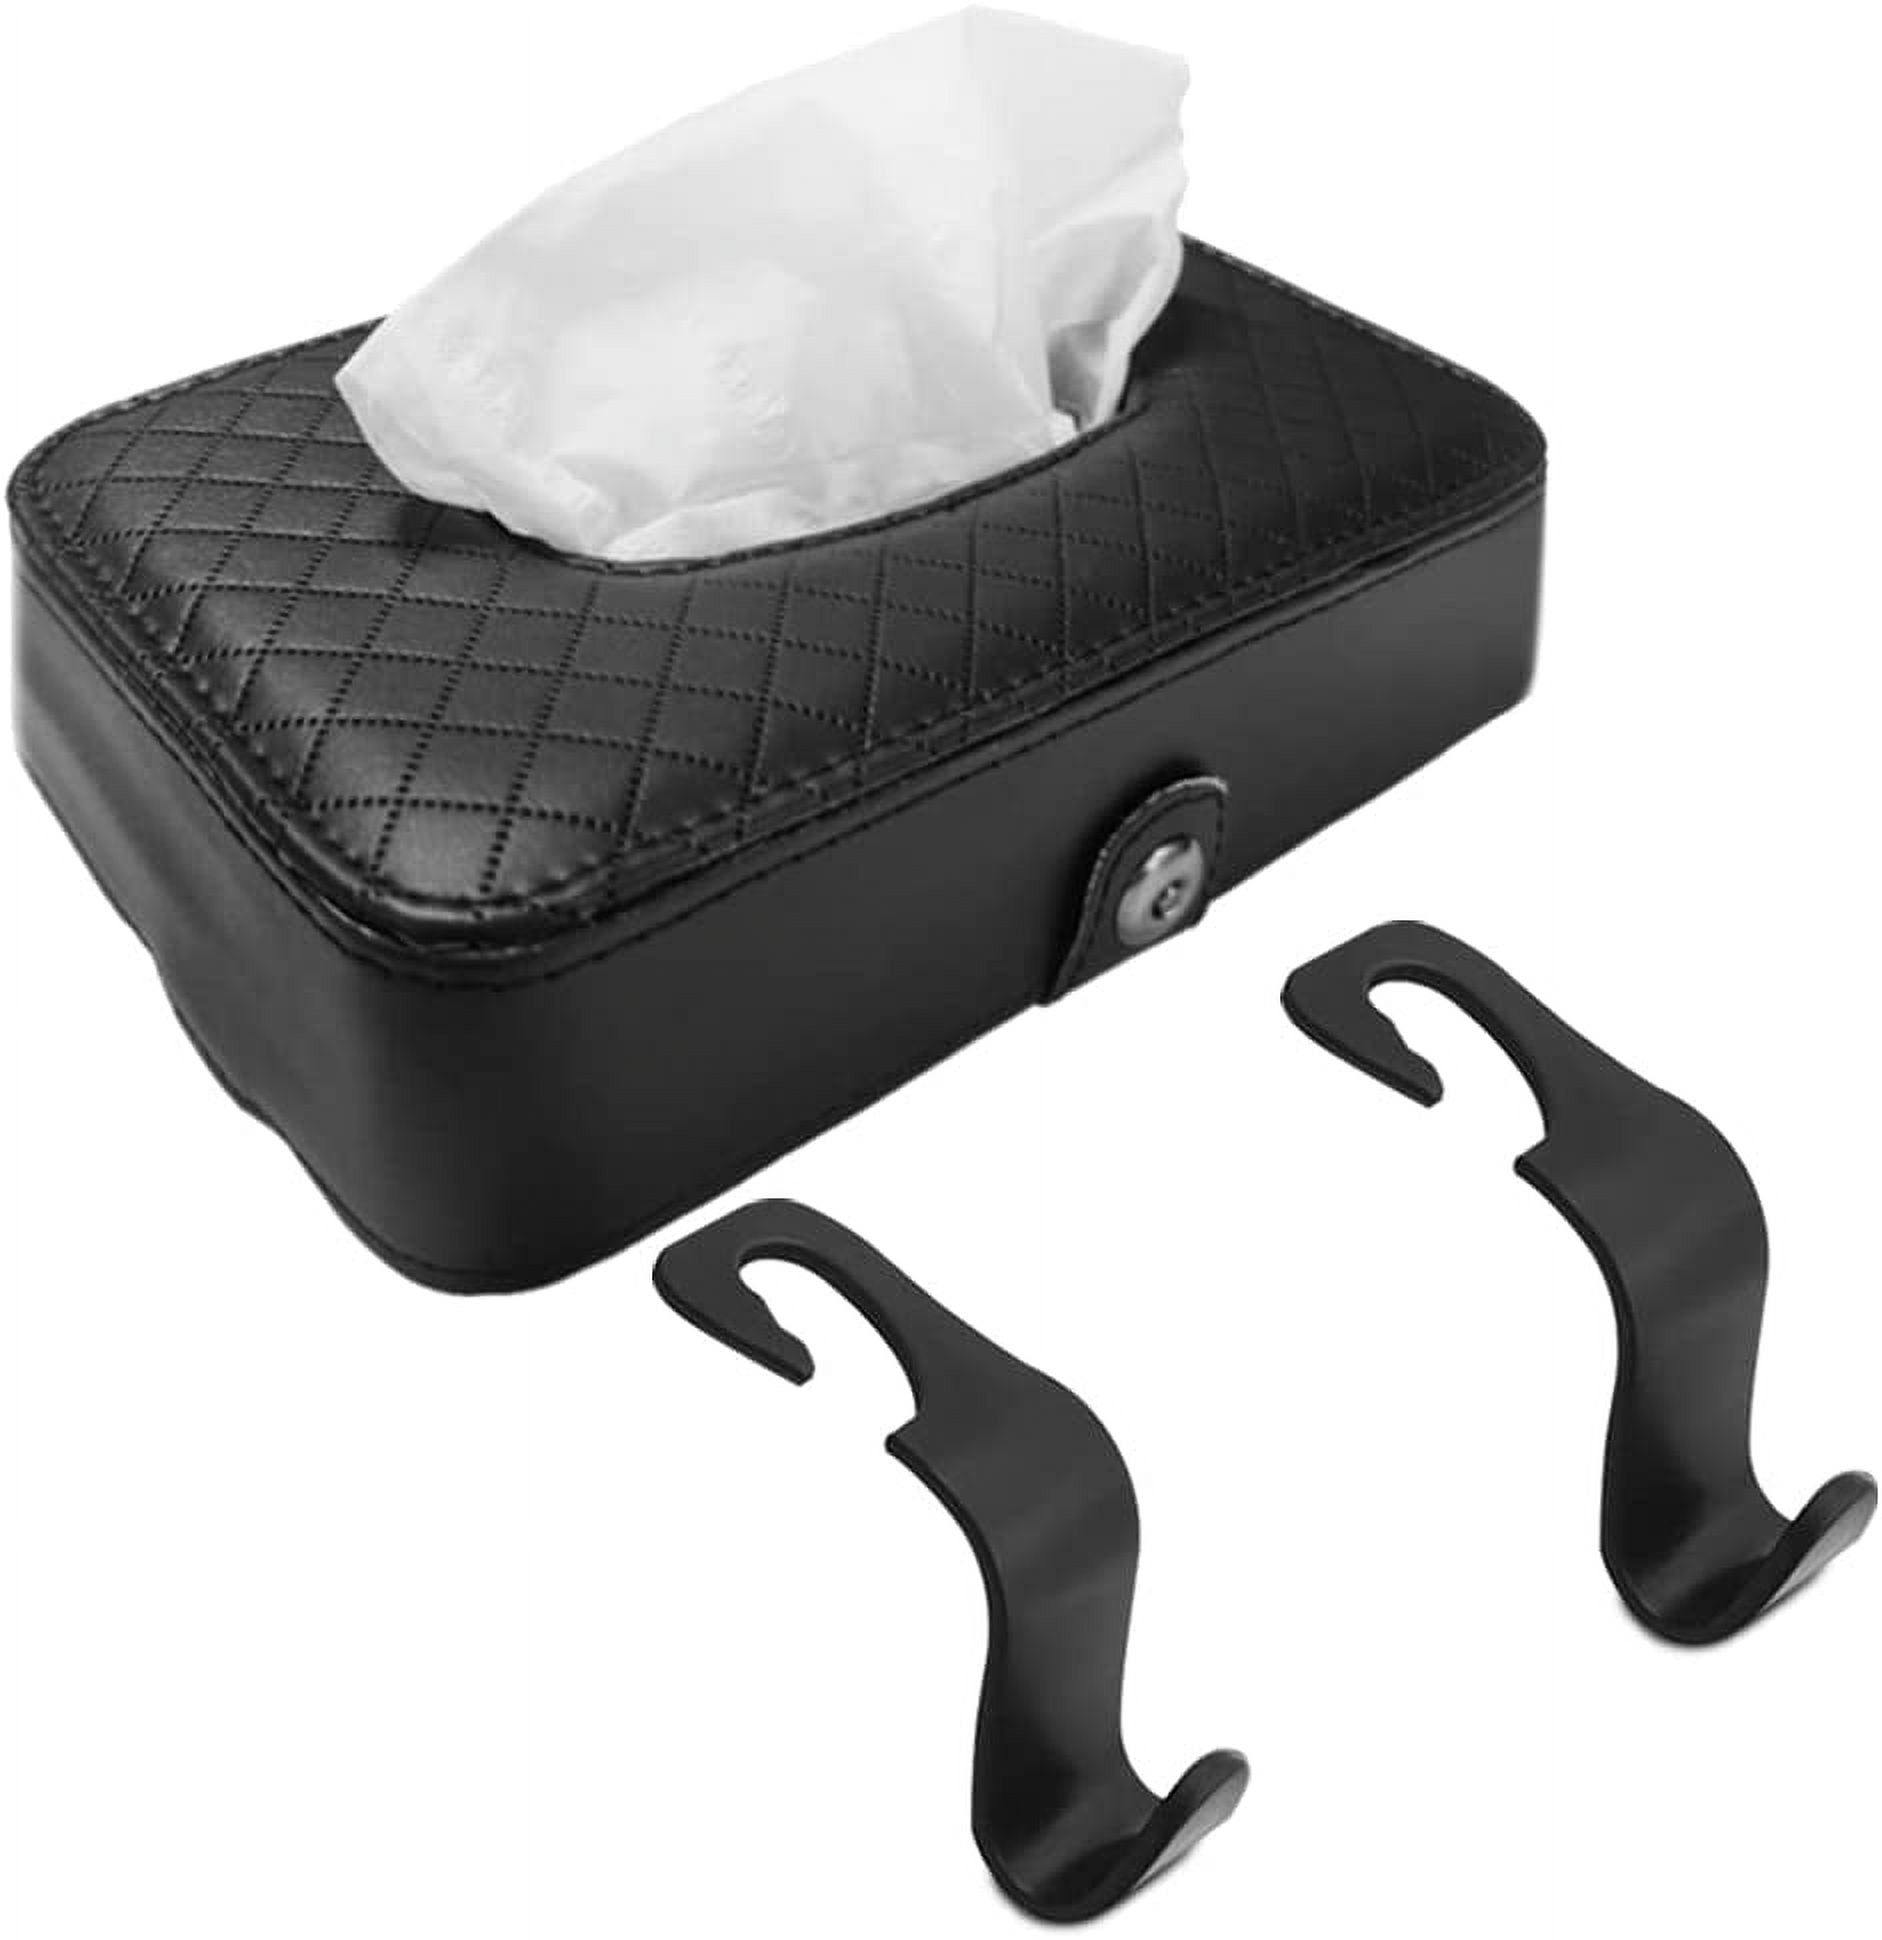 Tissue Holder for Car For High Functionality And Style 